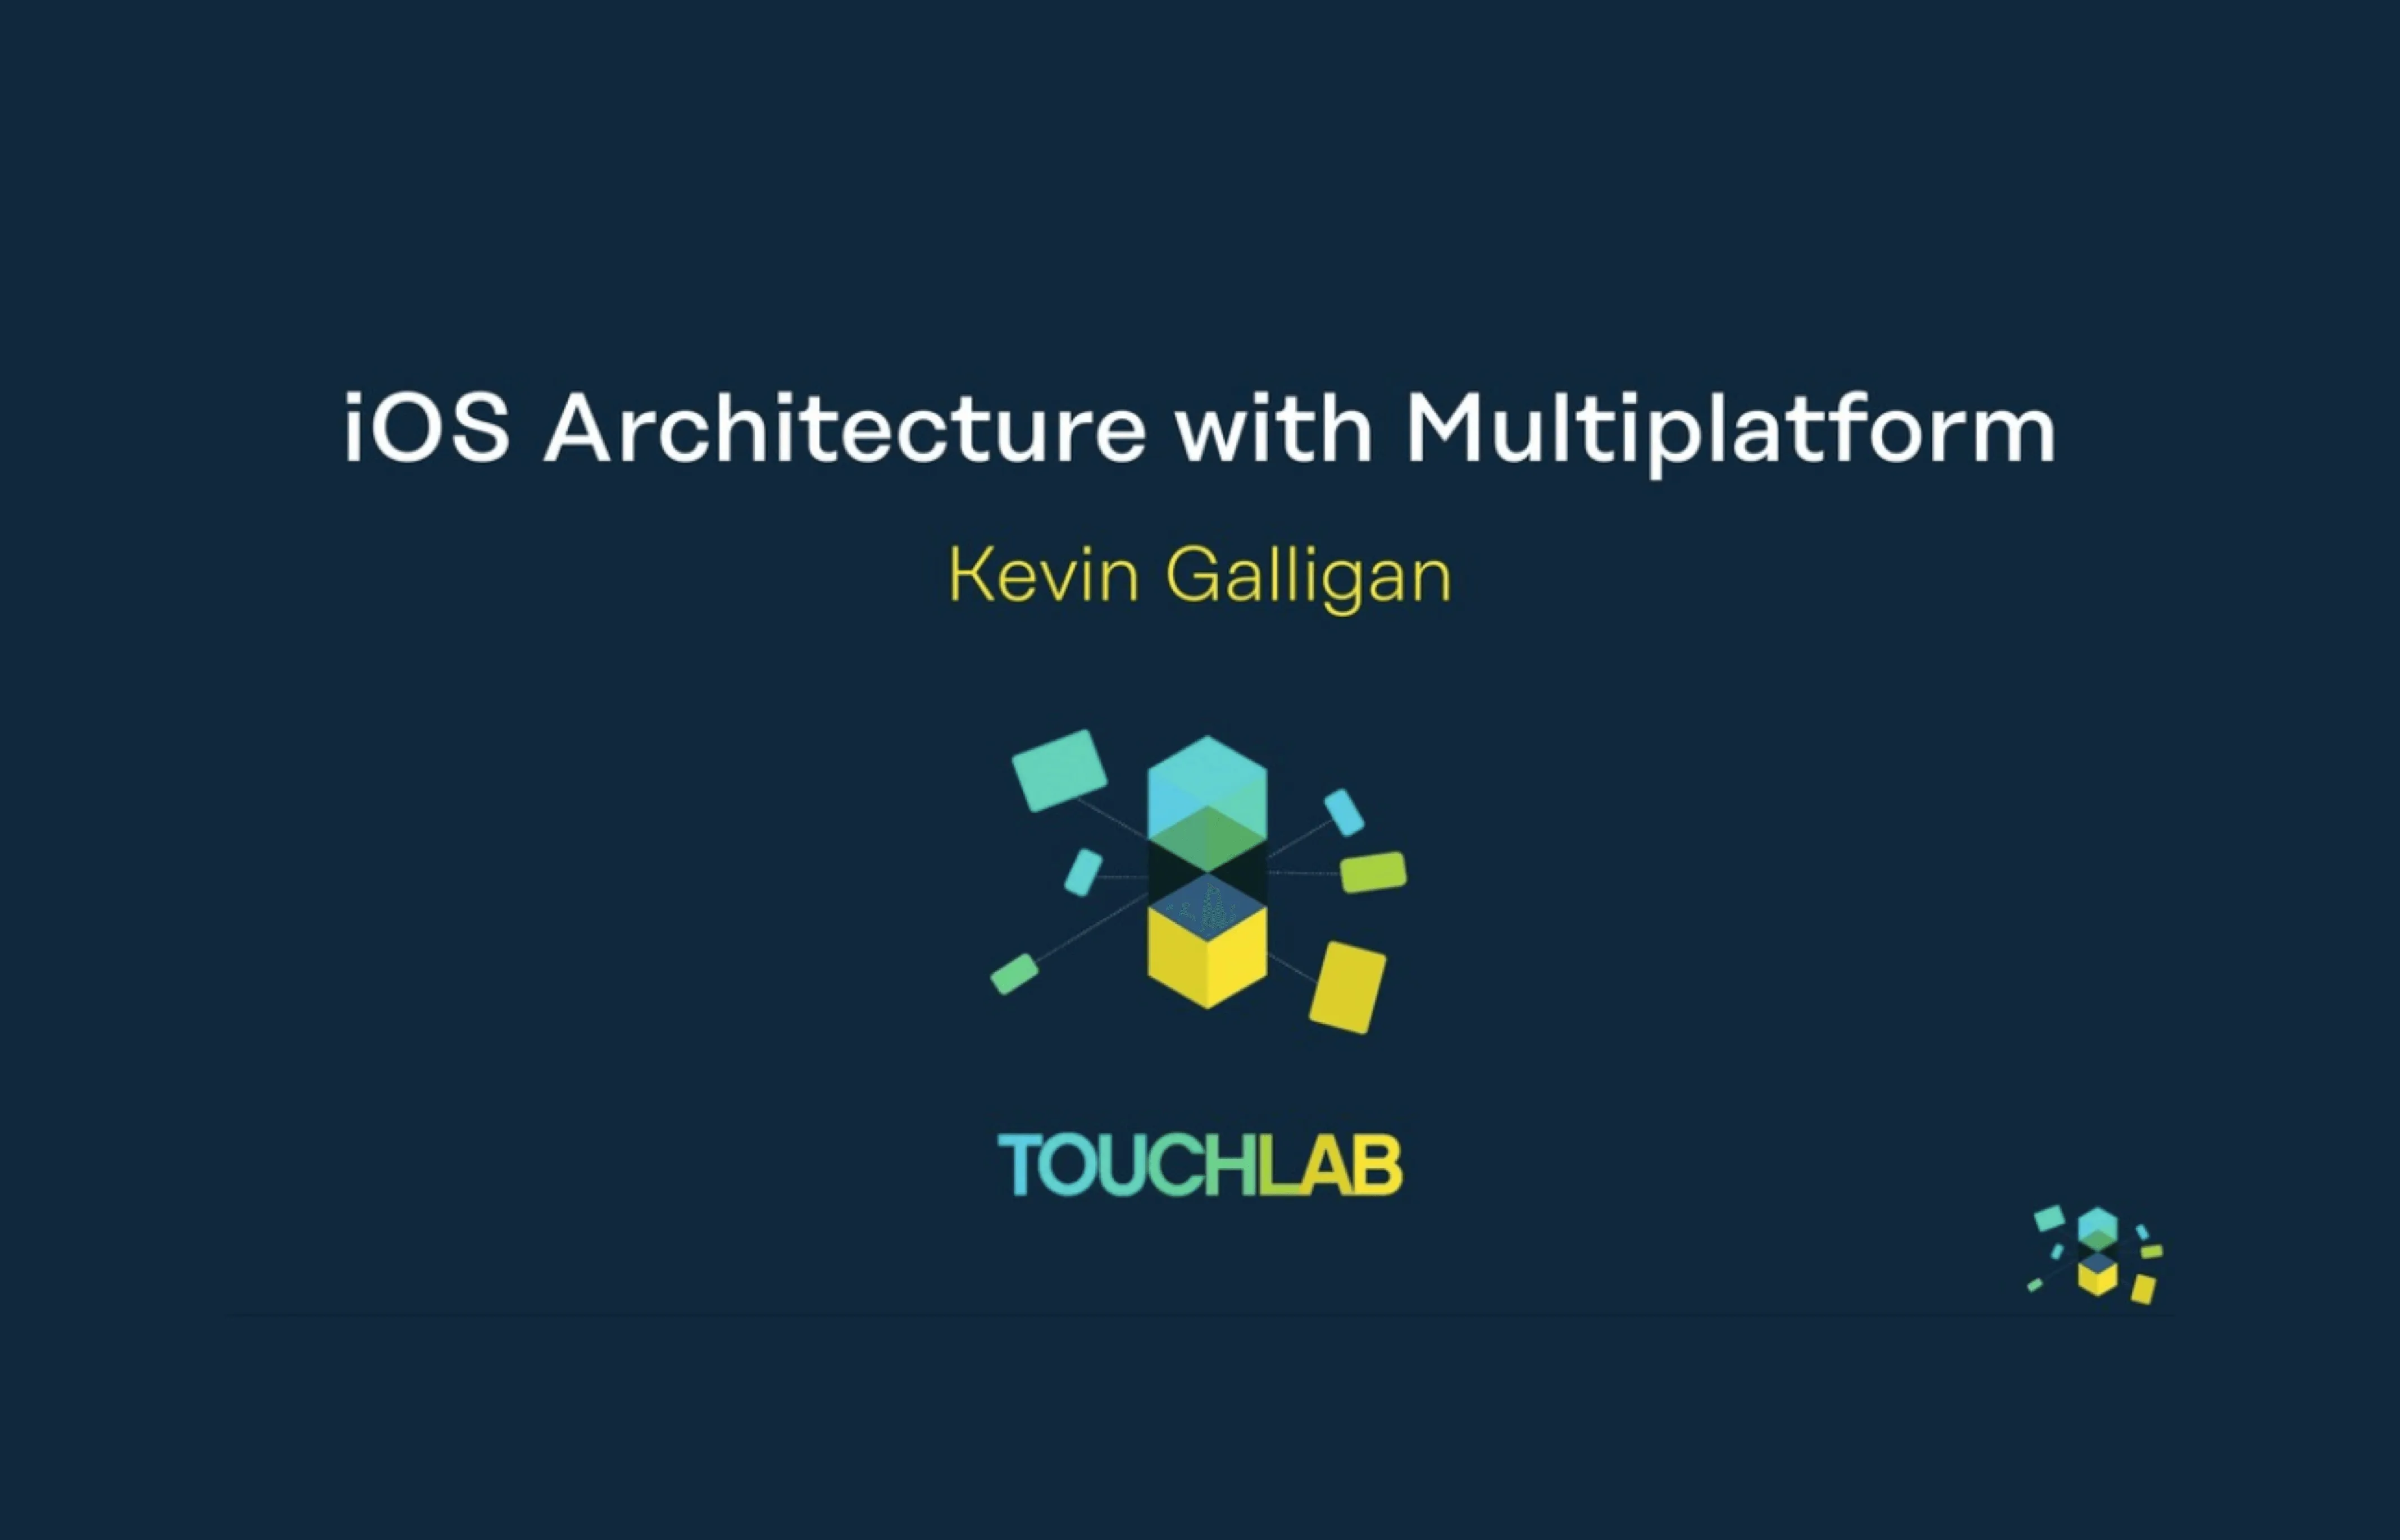 The future of shared code and architecture, as far as we’re concerned, is Kotlin Multiplatform. After experimenting with J2OBJC and our own code sharing product, Doppl, we're now exclusively focused on Kotlin Multiplatform.